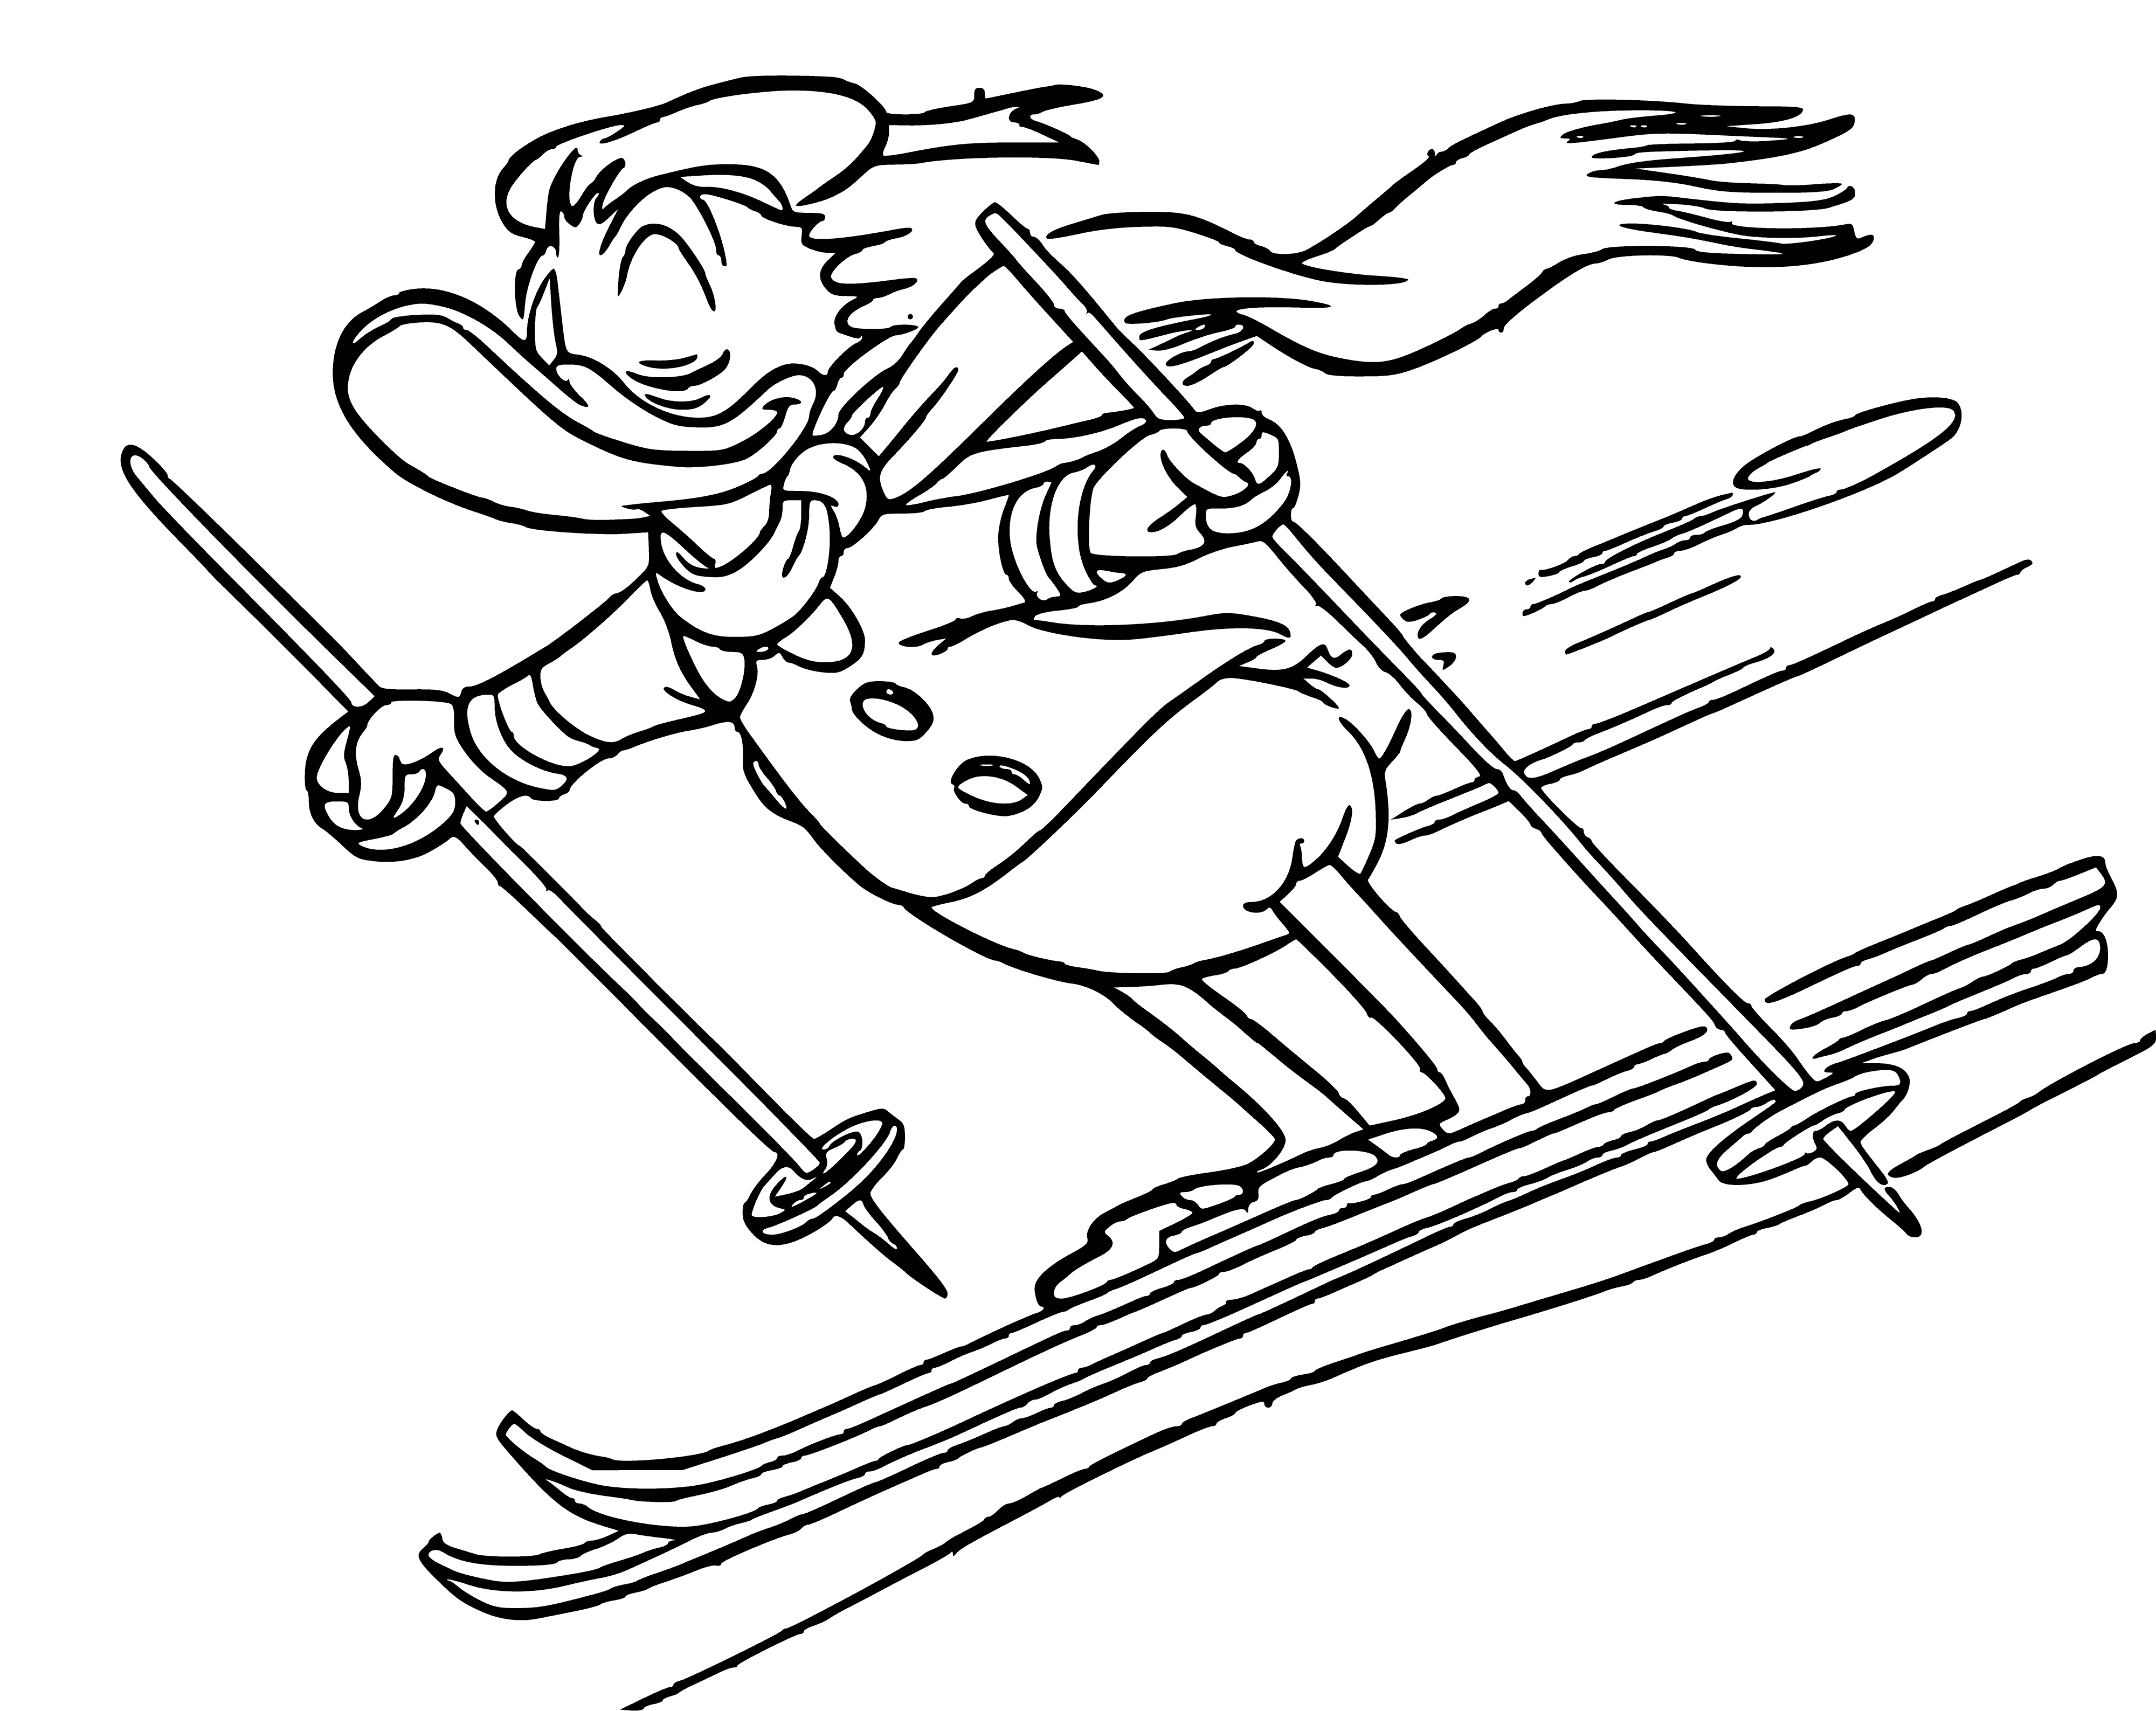 coloring page: Man skiing down hill w/ yellow shirt & red pants; blue sky & trees around.